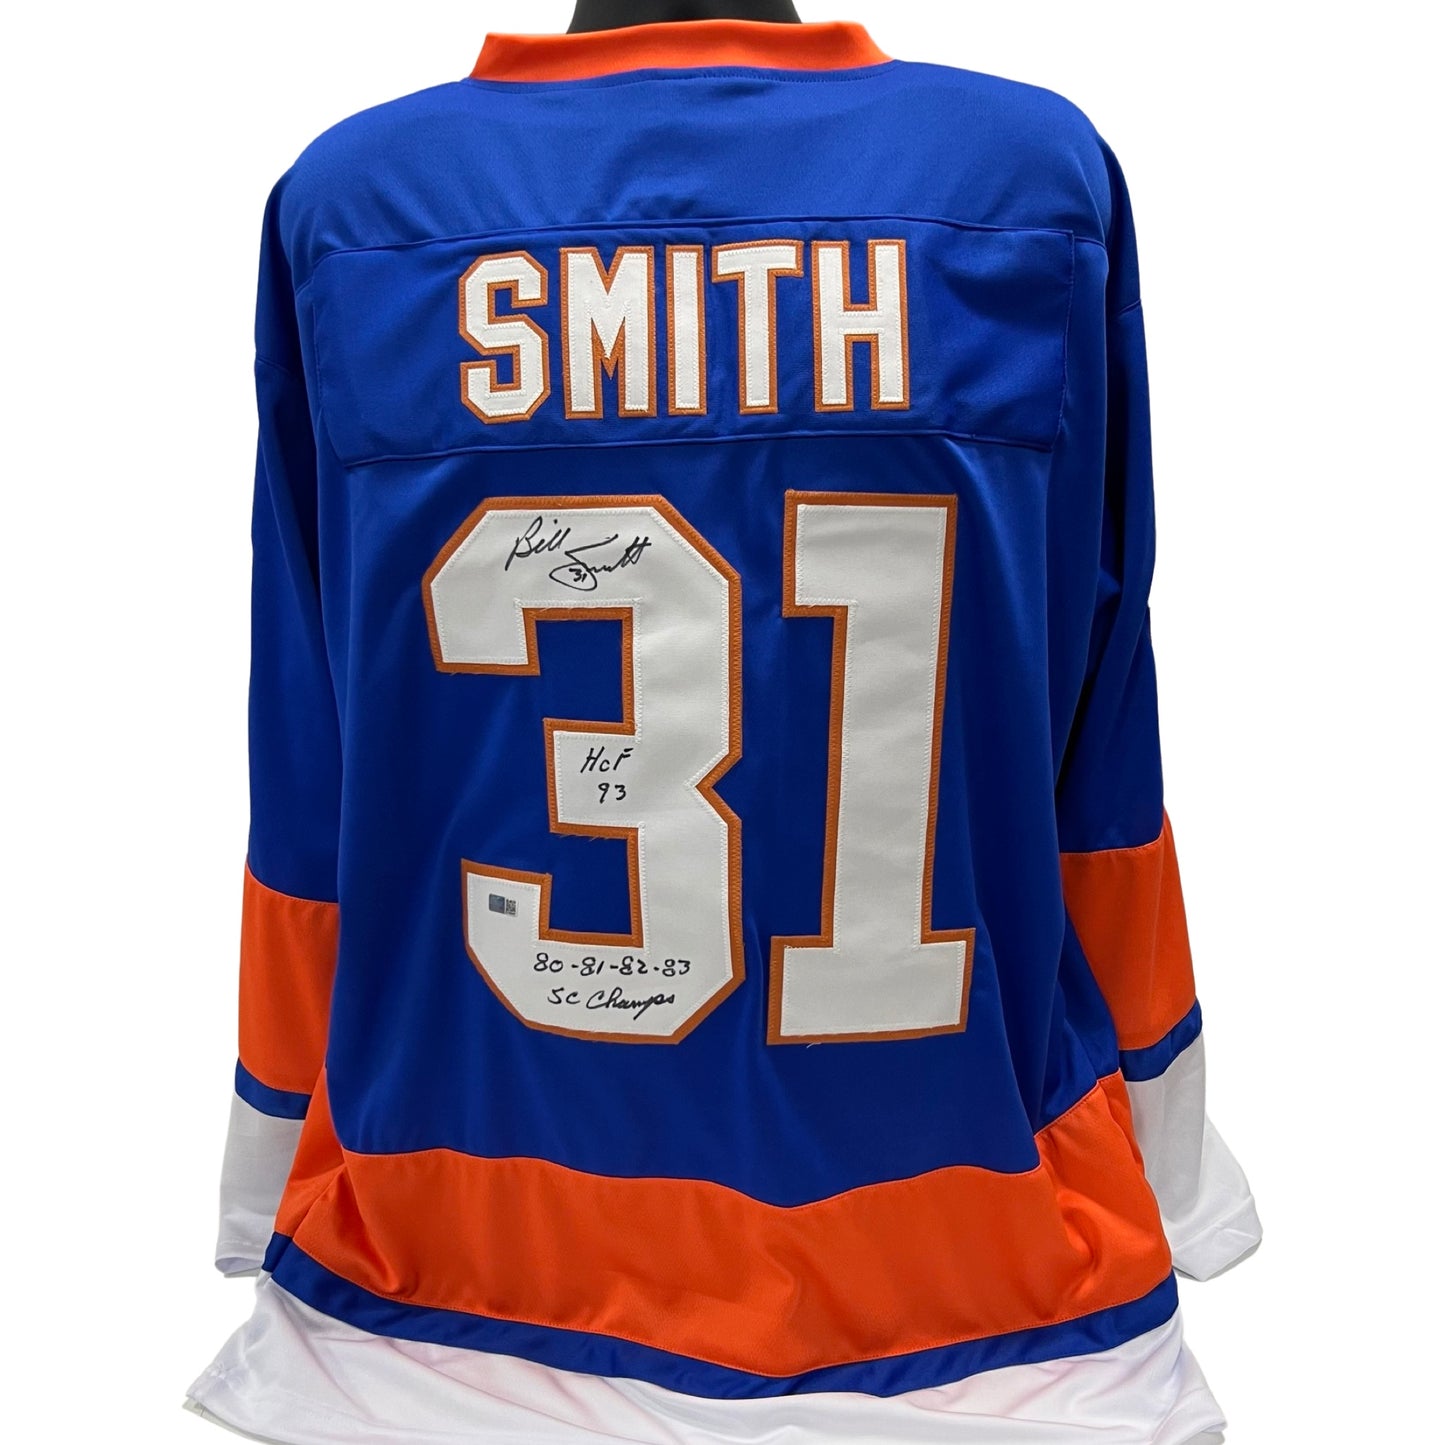 Billy Smith Autographed New York Islanders Blue Jersey "HOF 93, SC Champs 80 81 82 83" Inscriptions Steiner CX